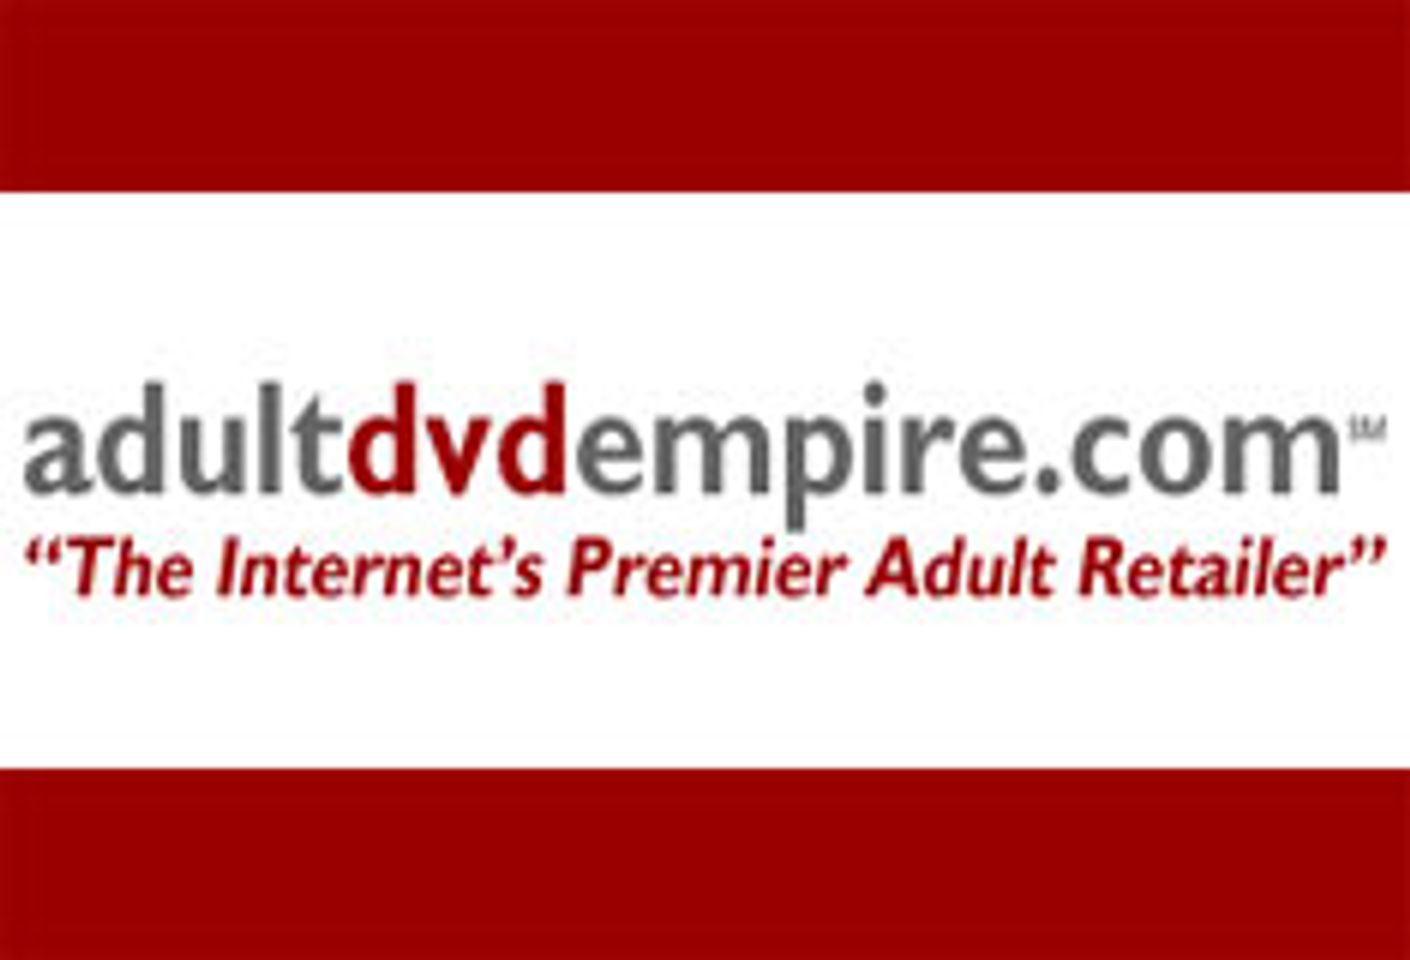 Adult DVD Empire Adds German Goo Girls to Video on Demand